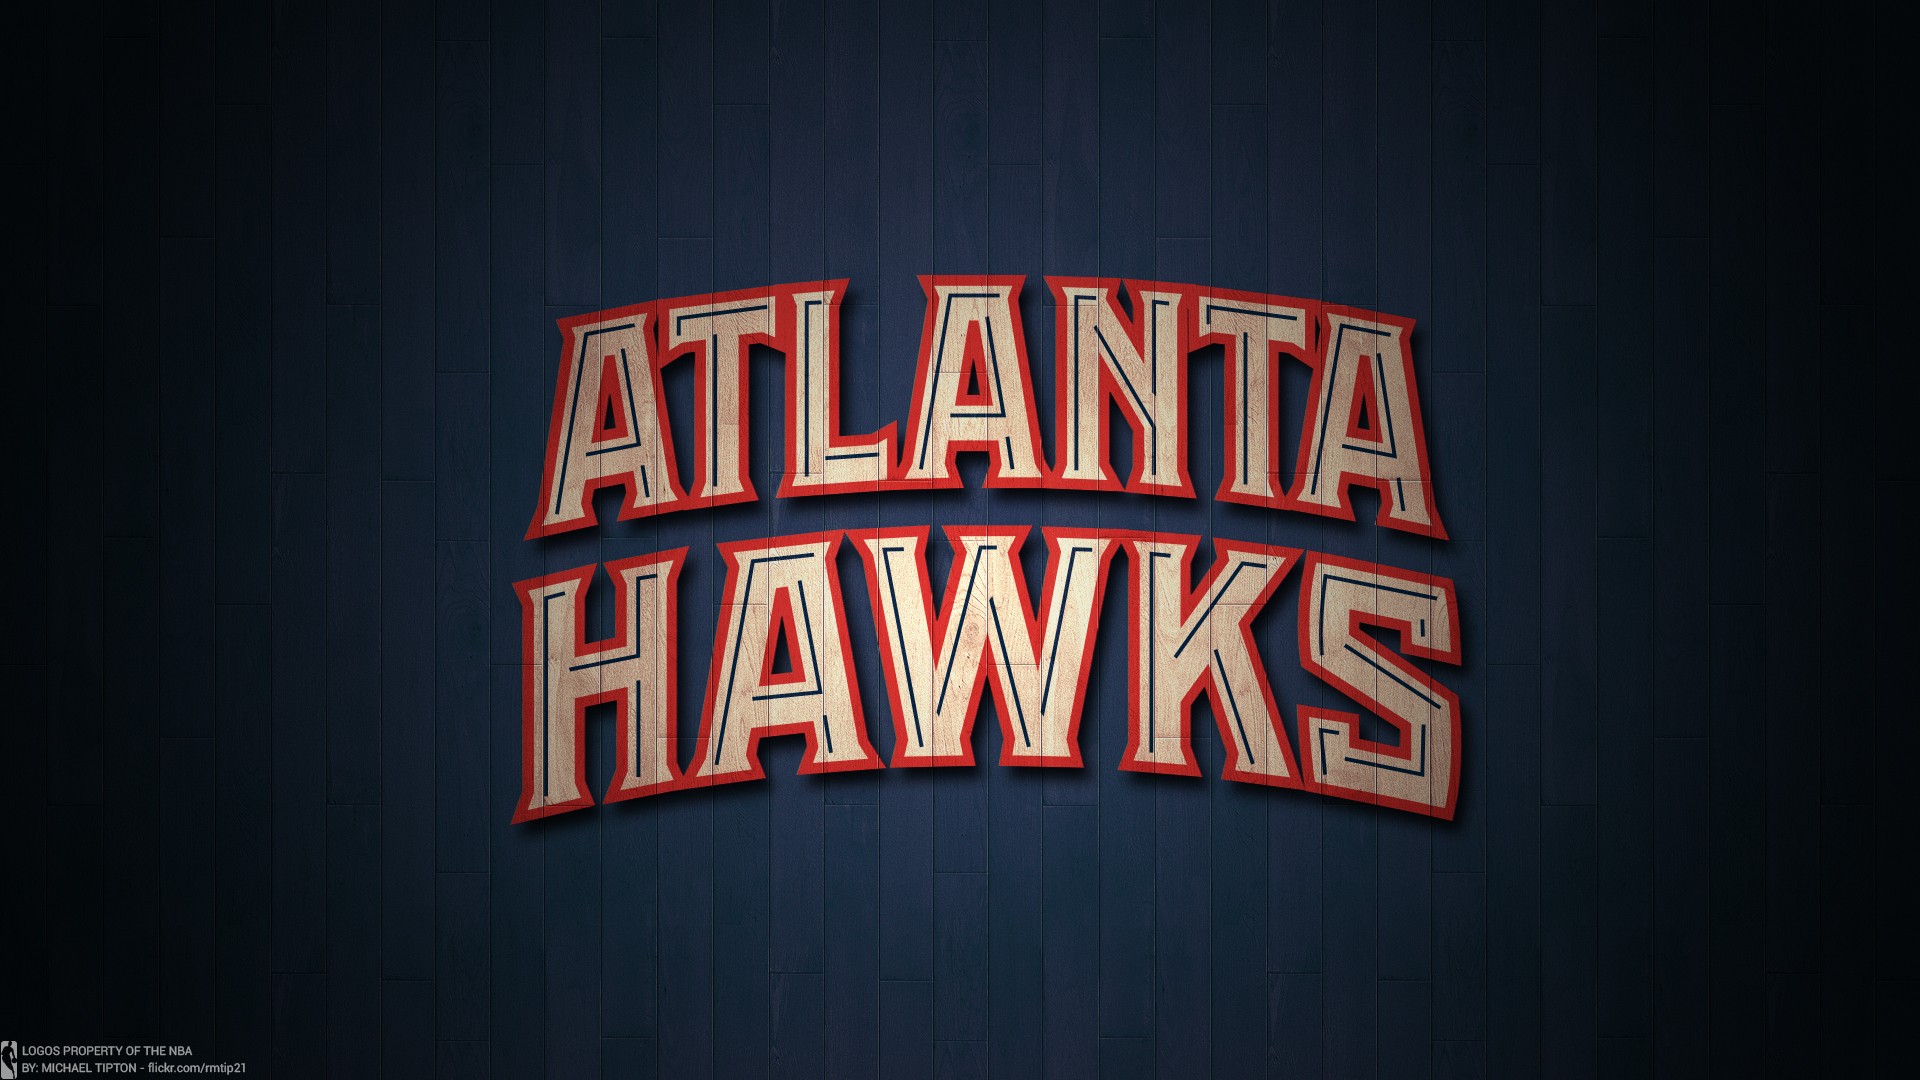 Atlanta Hawks Wallpaper with image dimensions 1920x1080 pixel. You can make this wallpaper for your Desktop Computer Backgrounds, Windows or Mac Screensavers, iPhone Lock screen, Tablet or Android and another Mobile Phone device